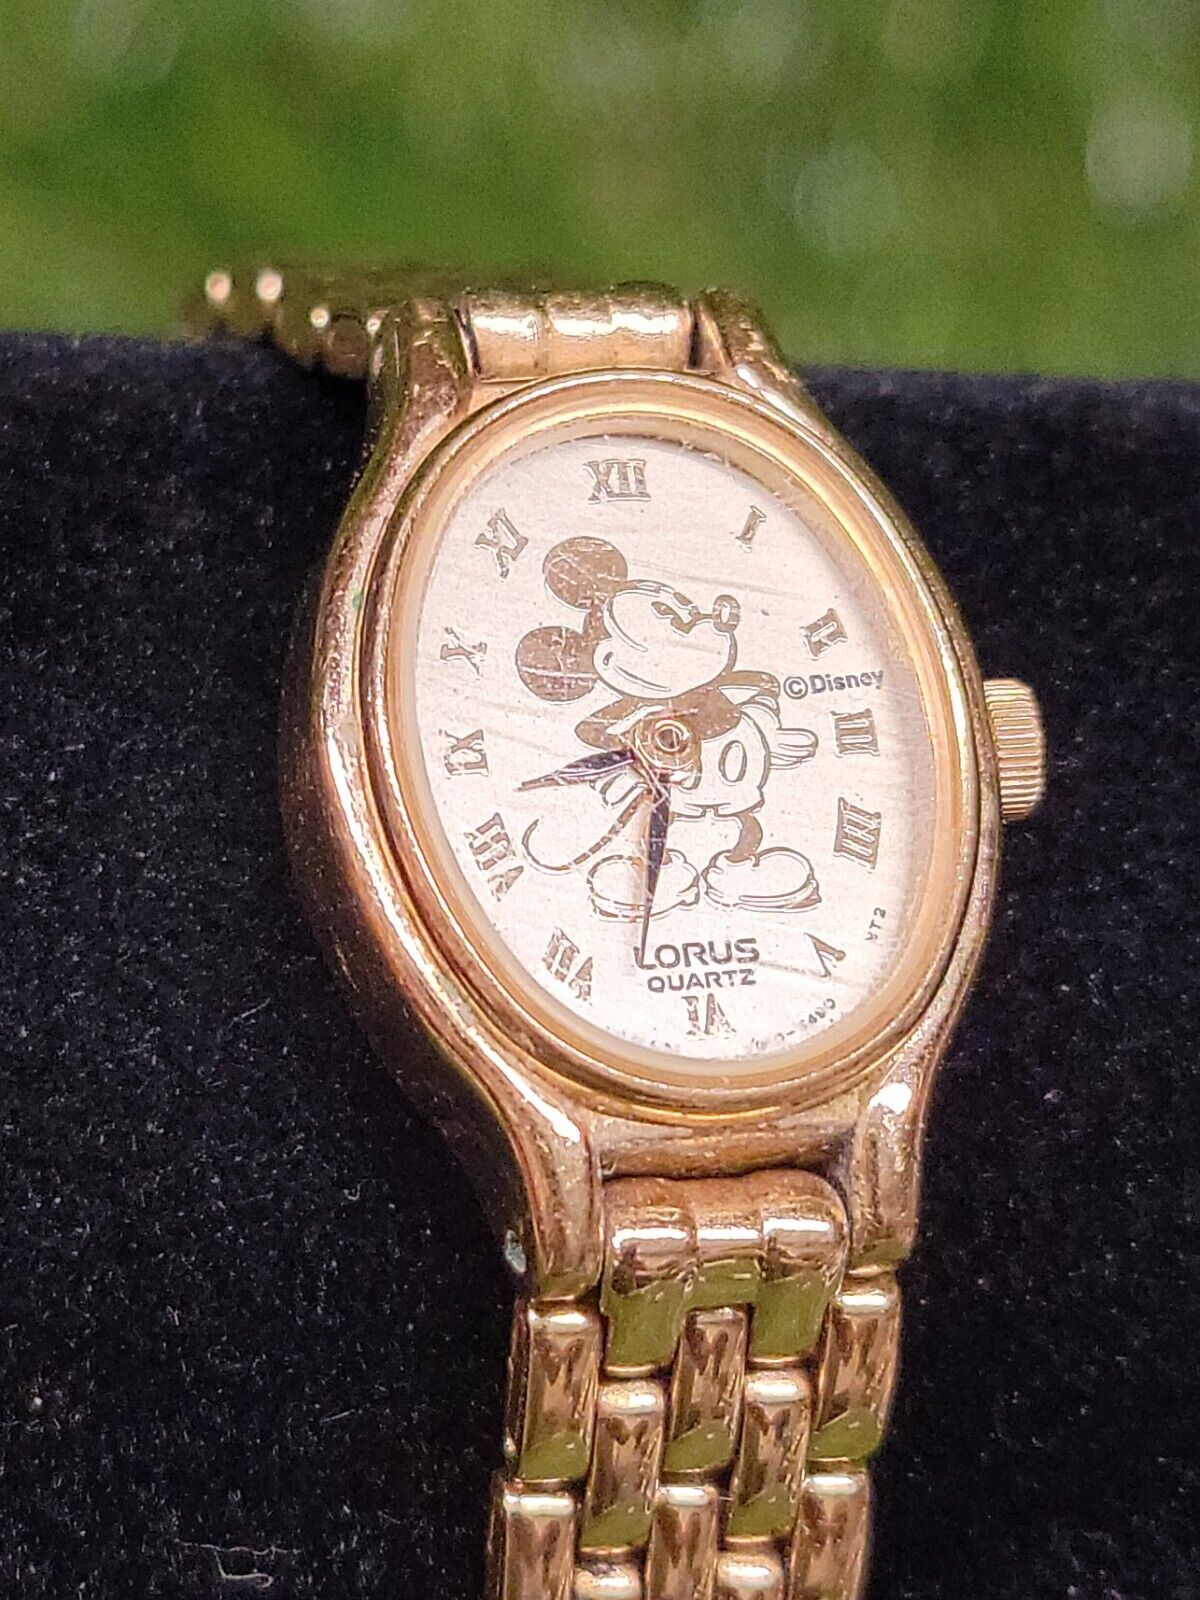 Vintage Lorus Mickey Mouse Disney Gold Tone Watch Parts Or Repair